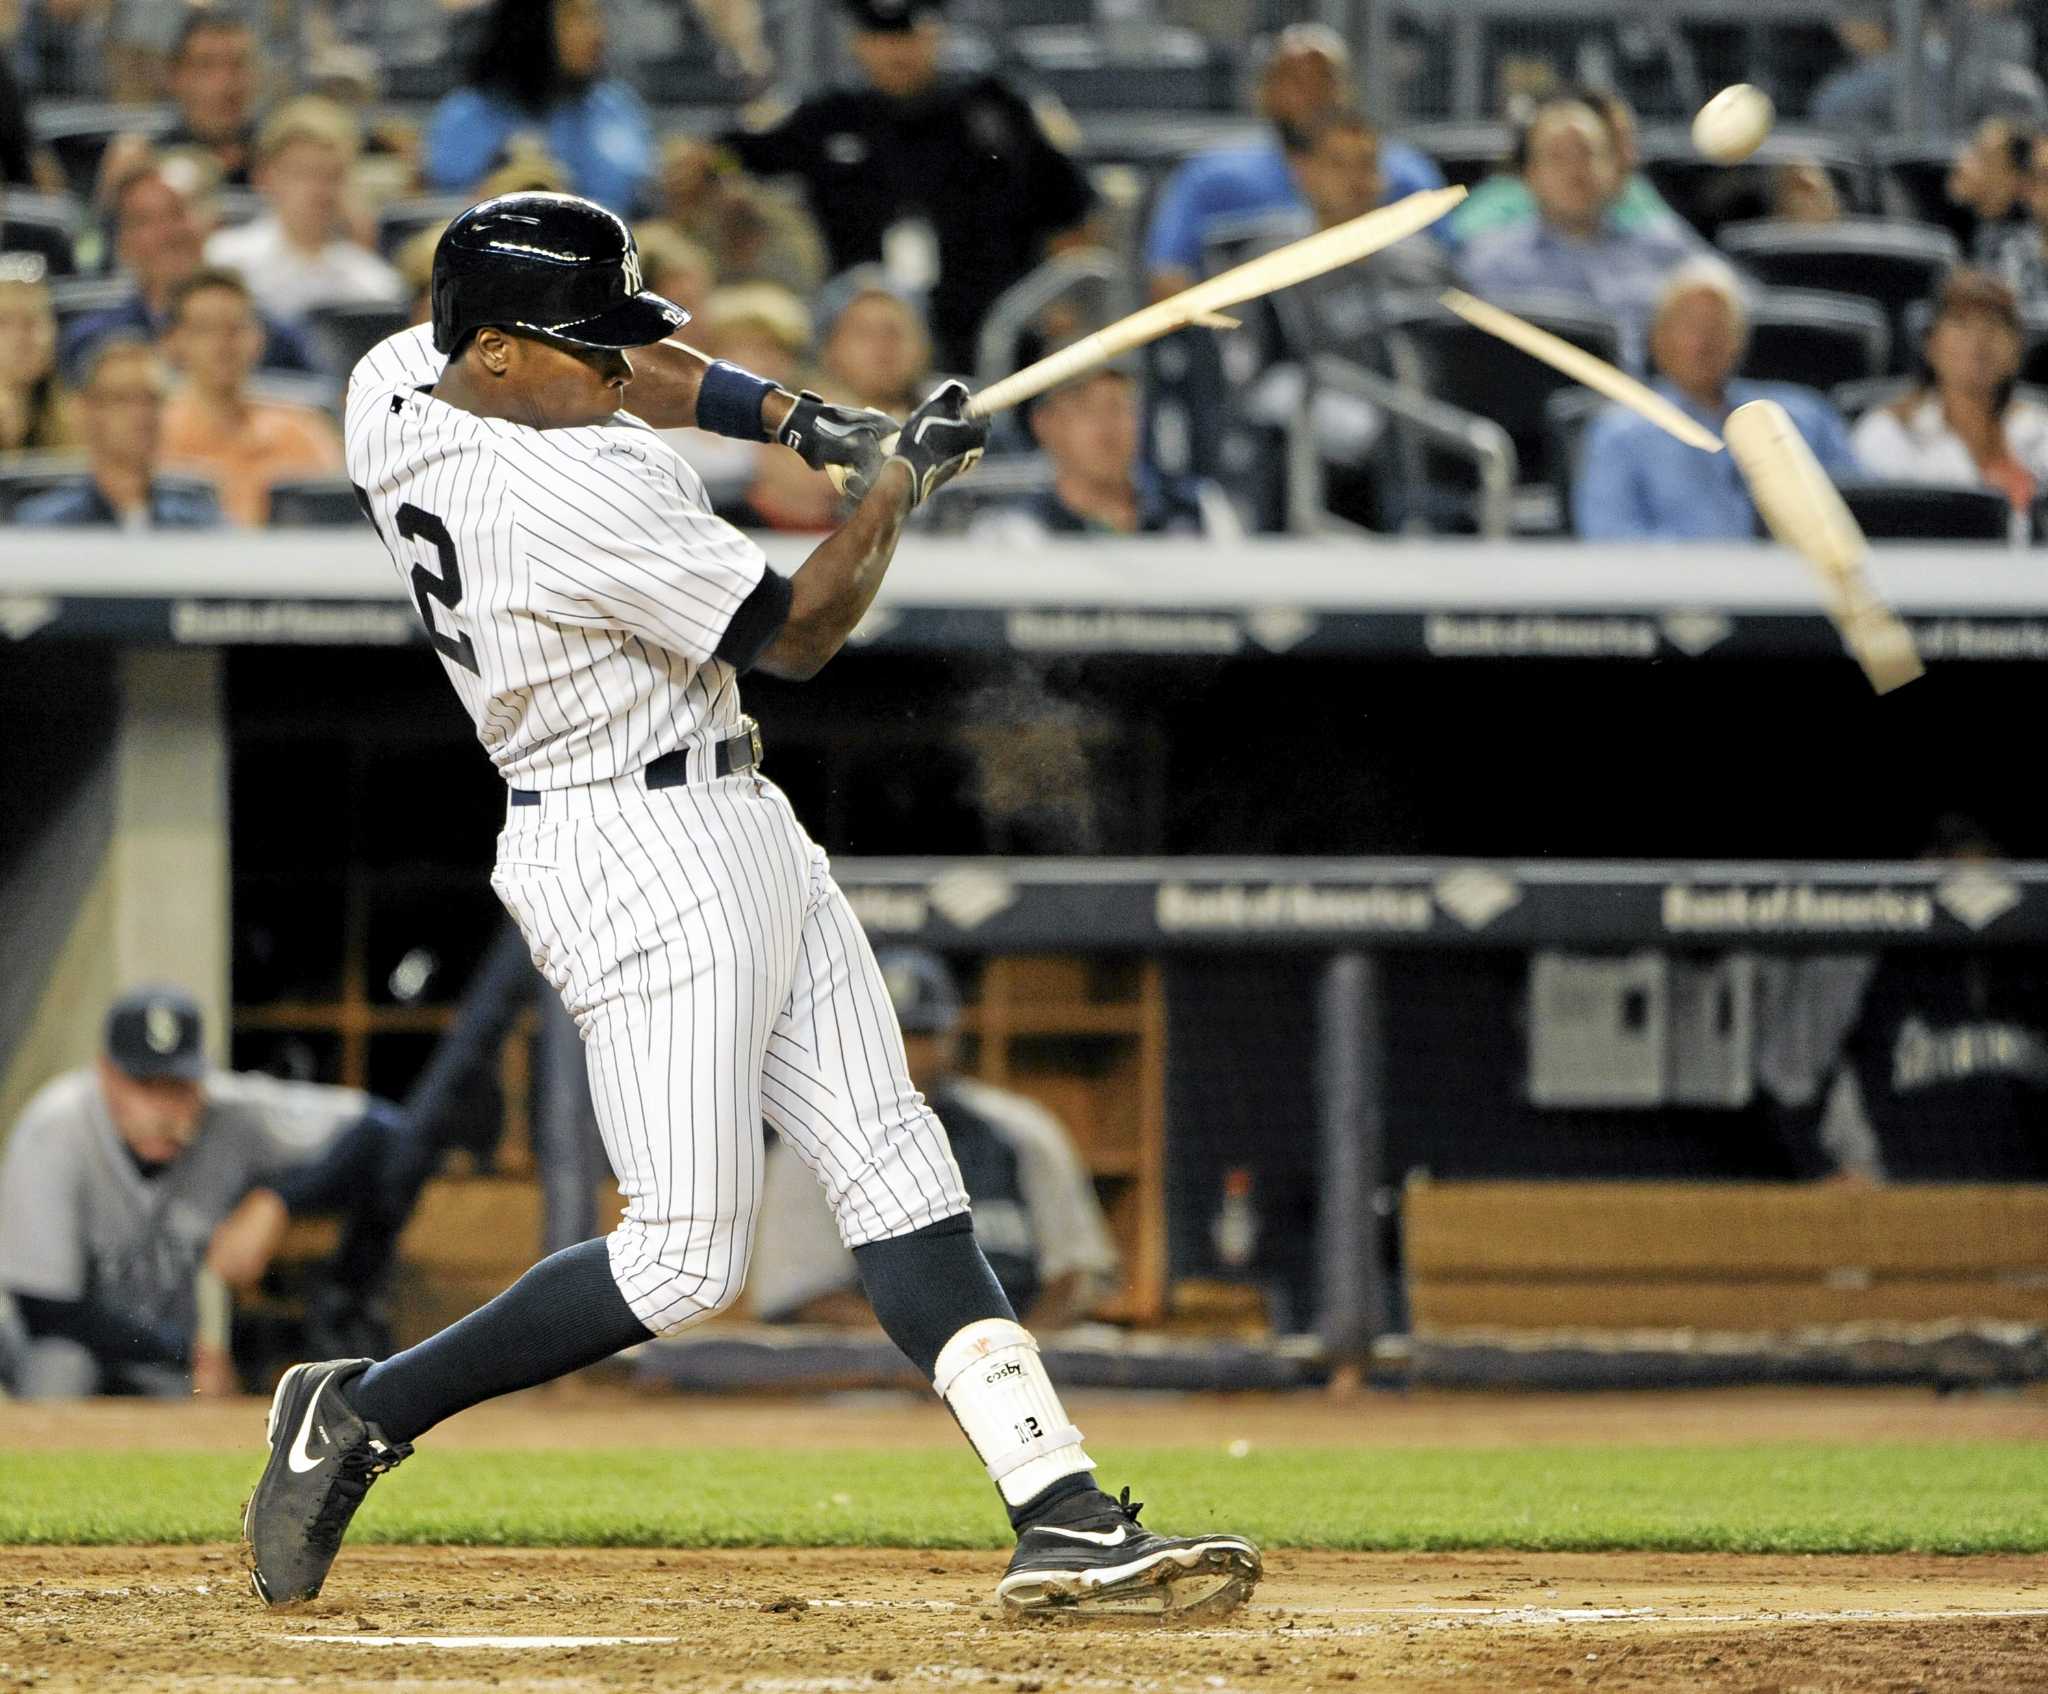 Cubs trade rumors: Alfonso Soriano to Yankees deal getting closer